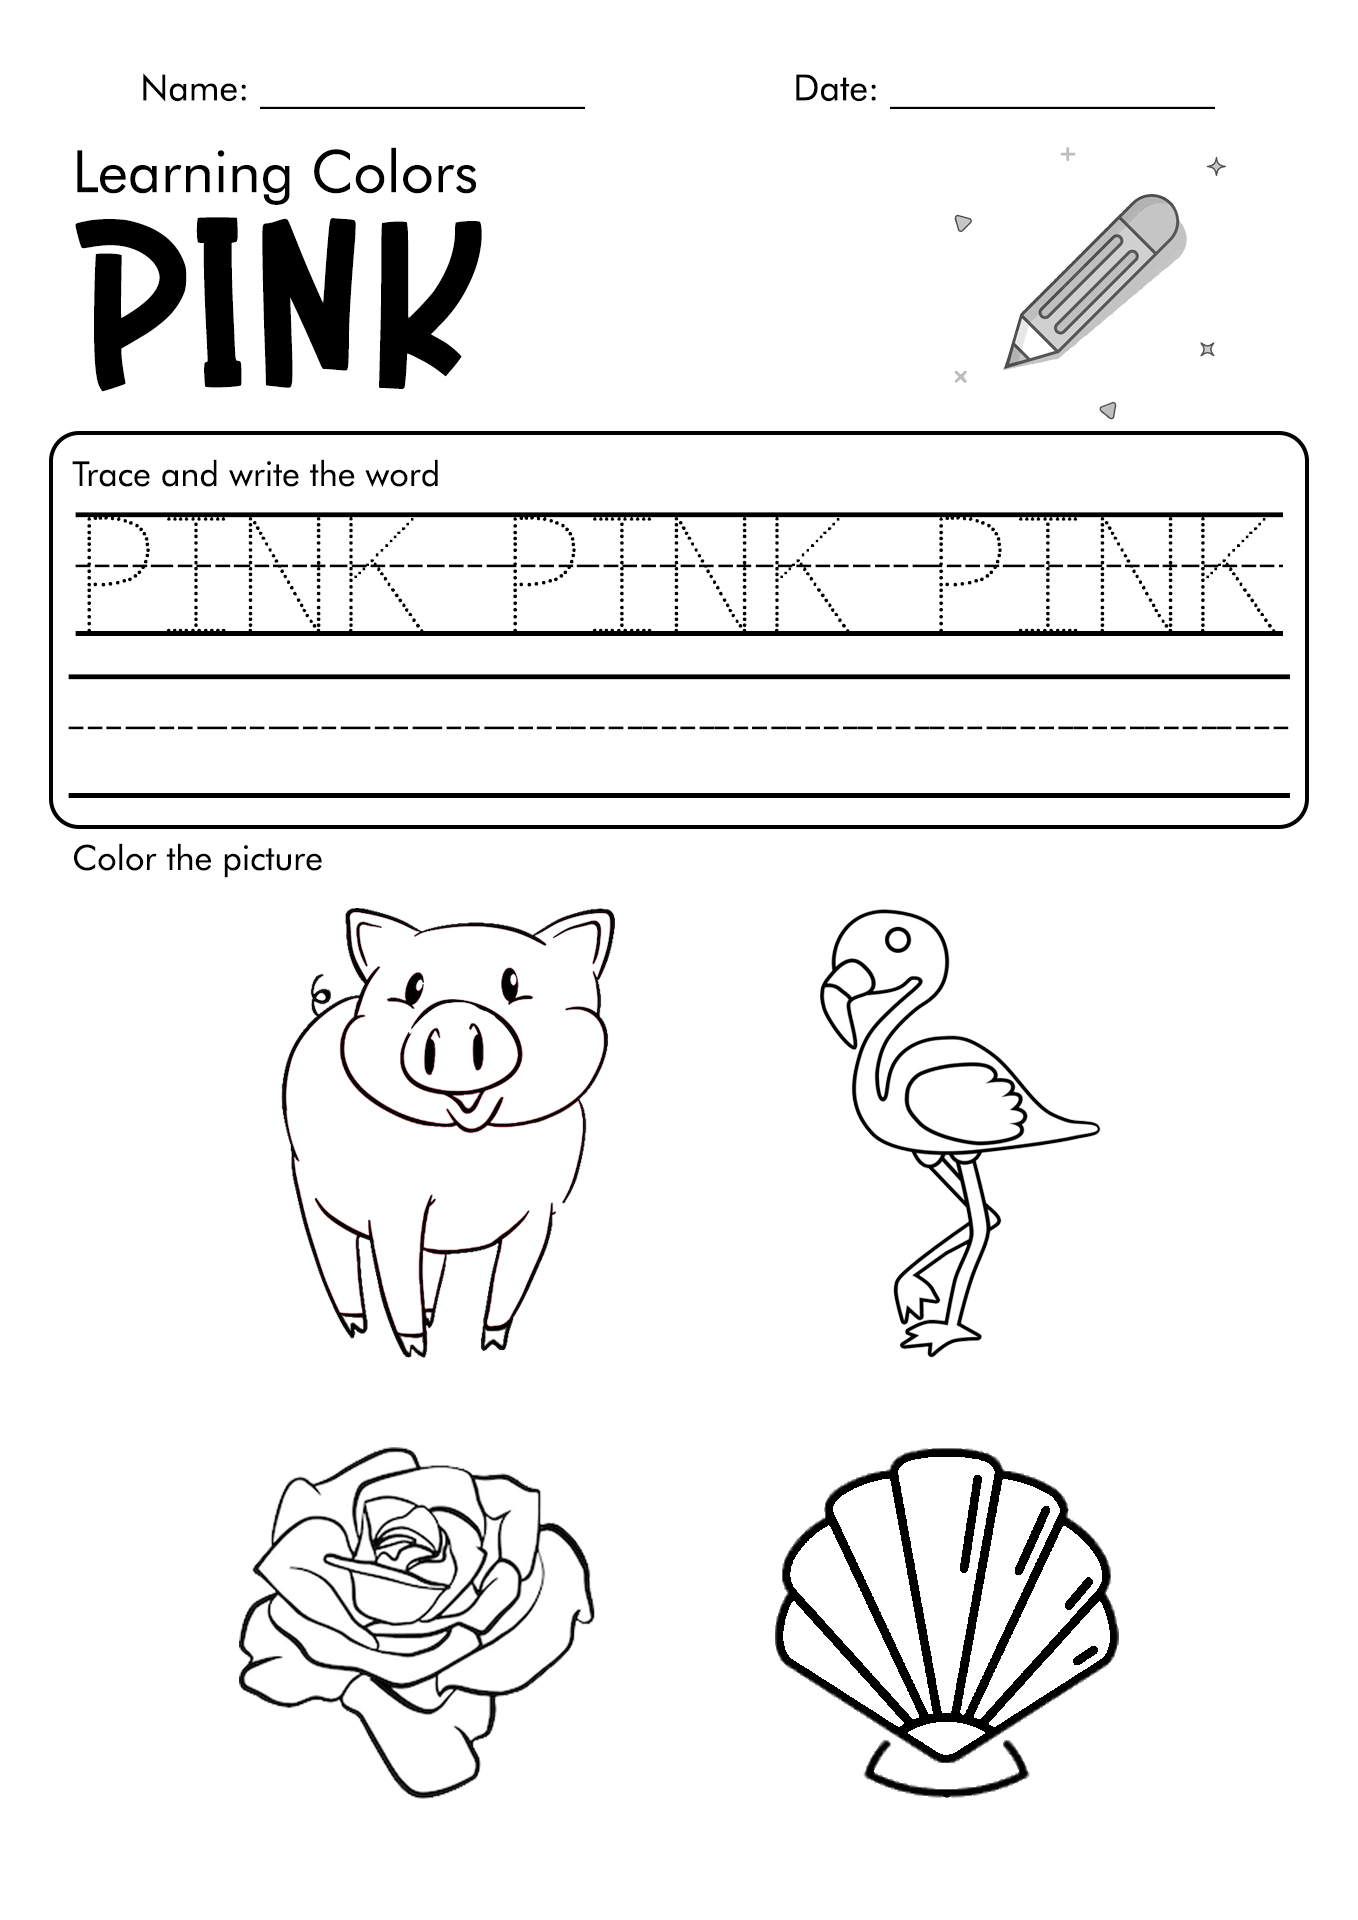 12 Best Images of English Colors Worksheet - Colors Coloring Worksheets